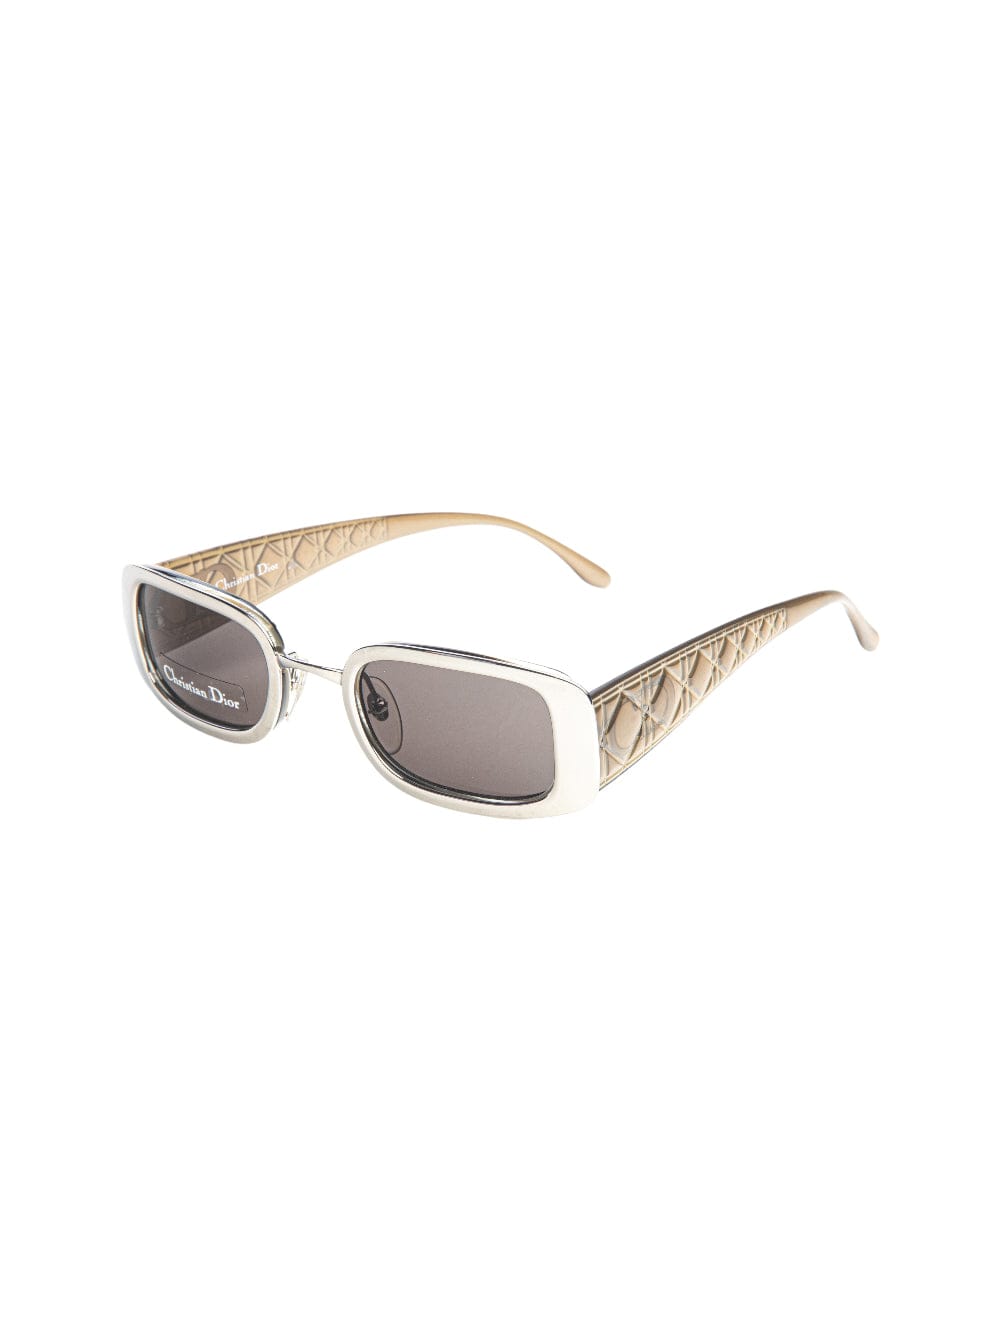 Ice - Limited Edition - Silver Sunglasses